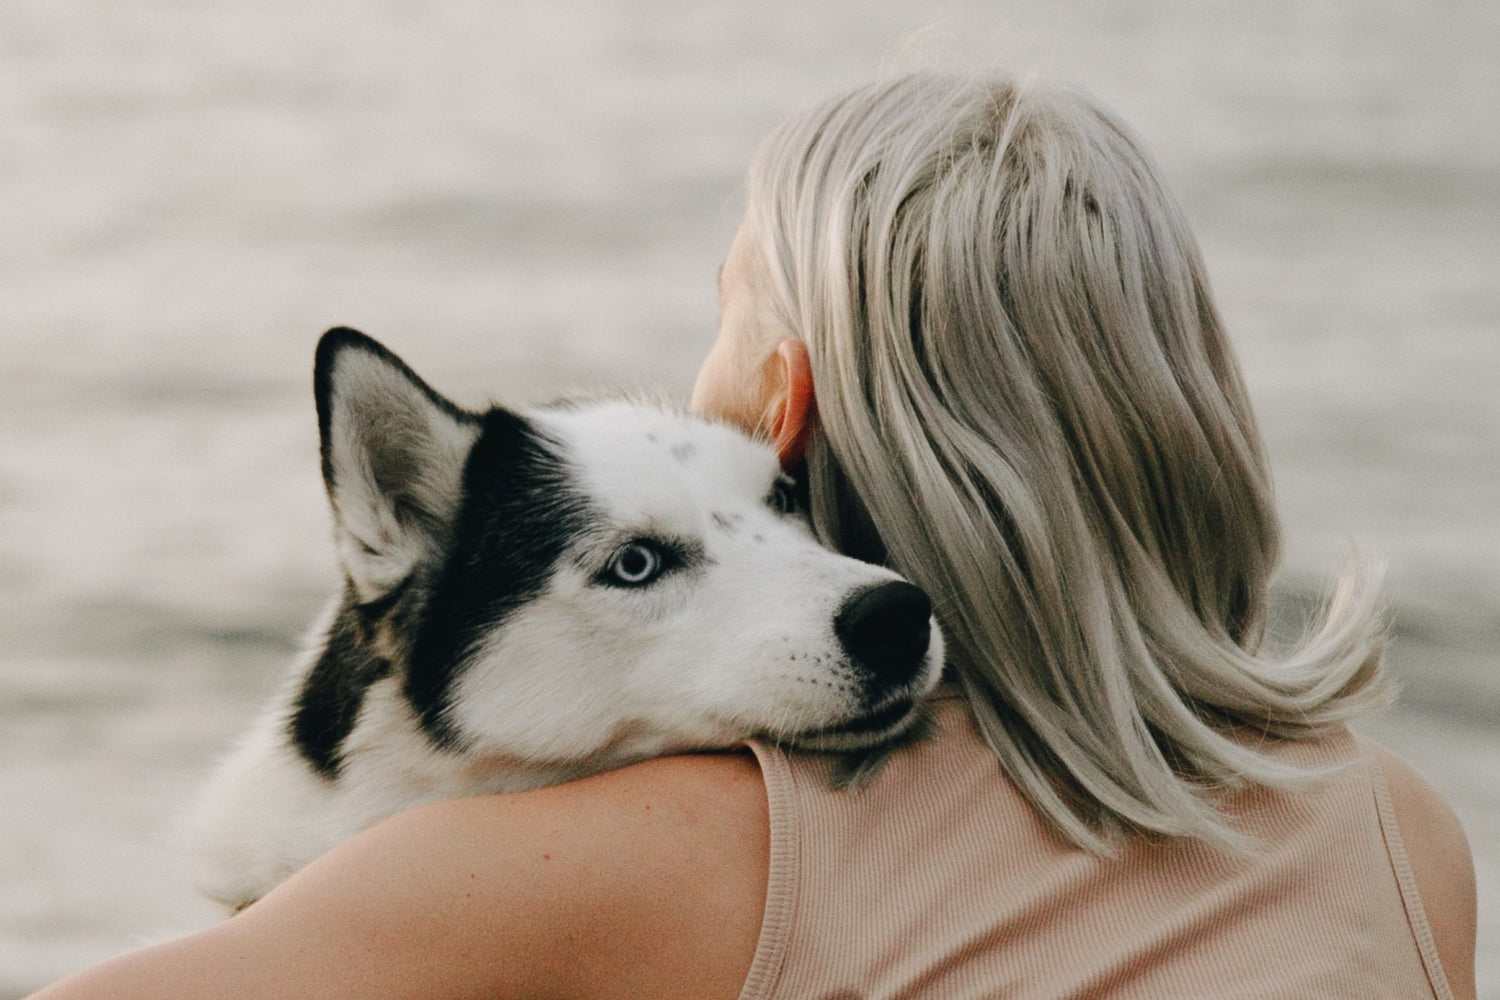 World Mental Health Day: How Having a Dog Can Improve Mental Health